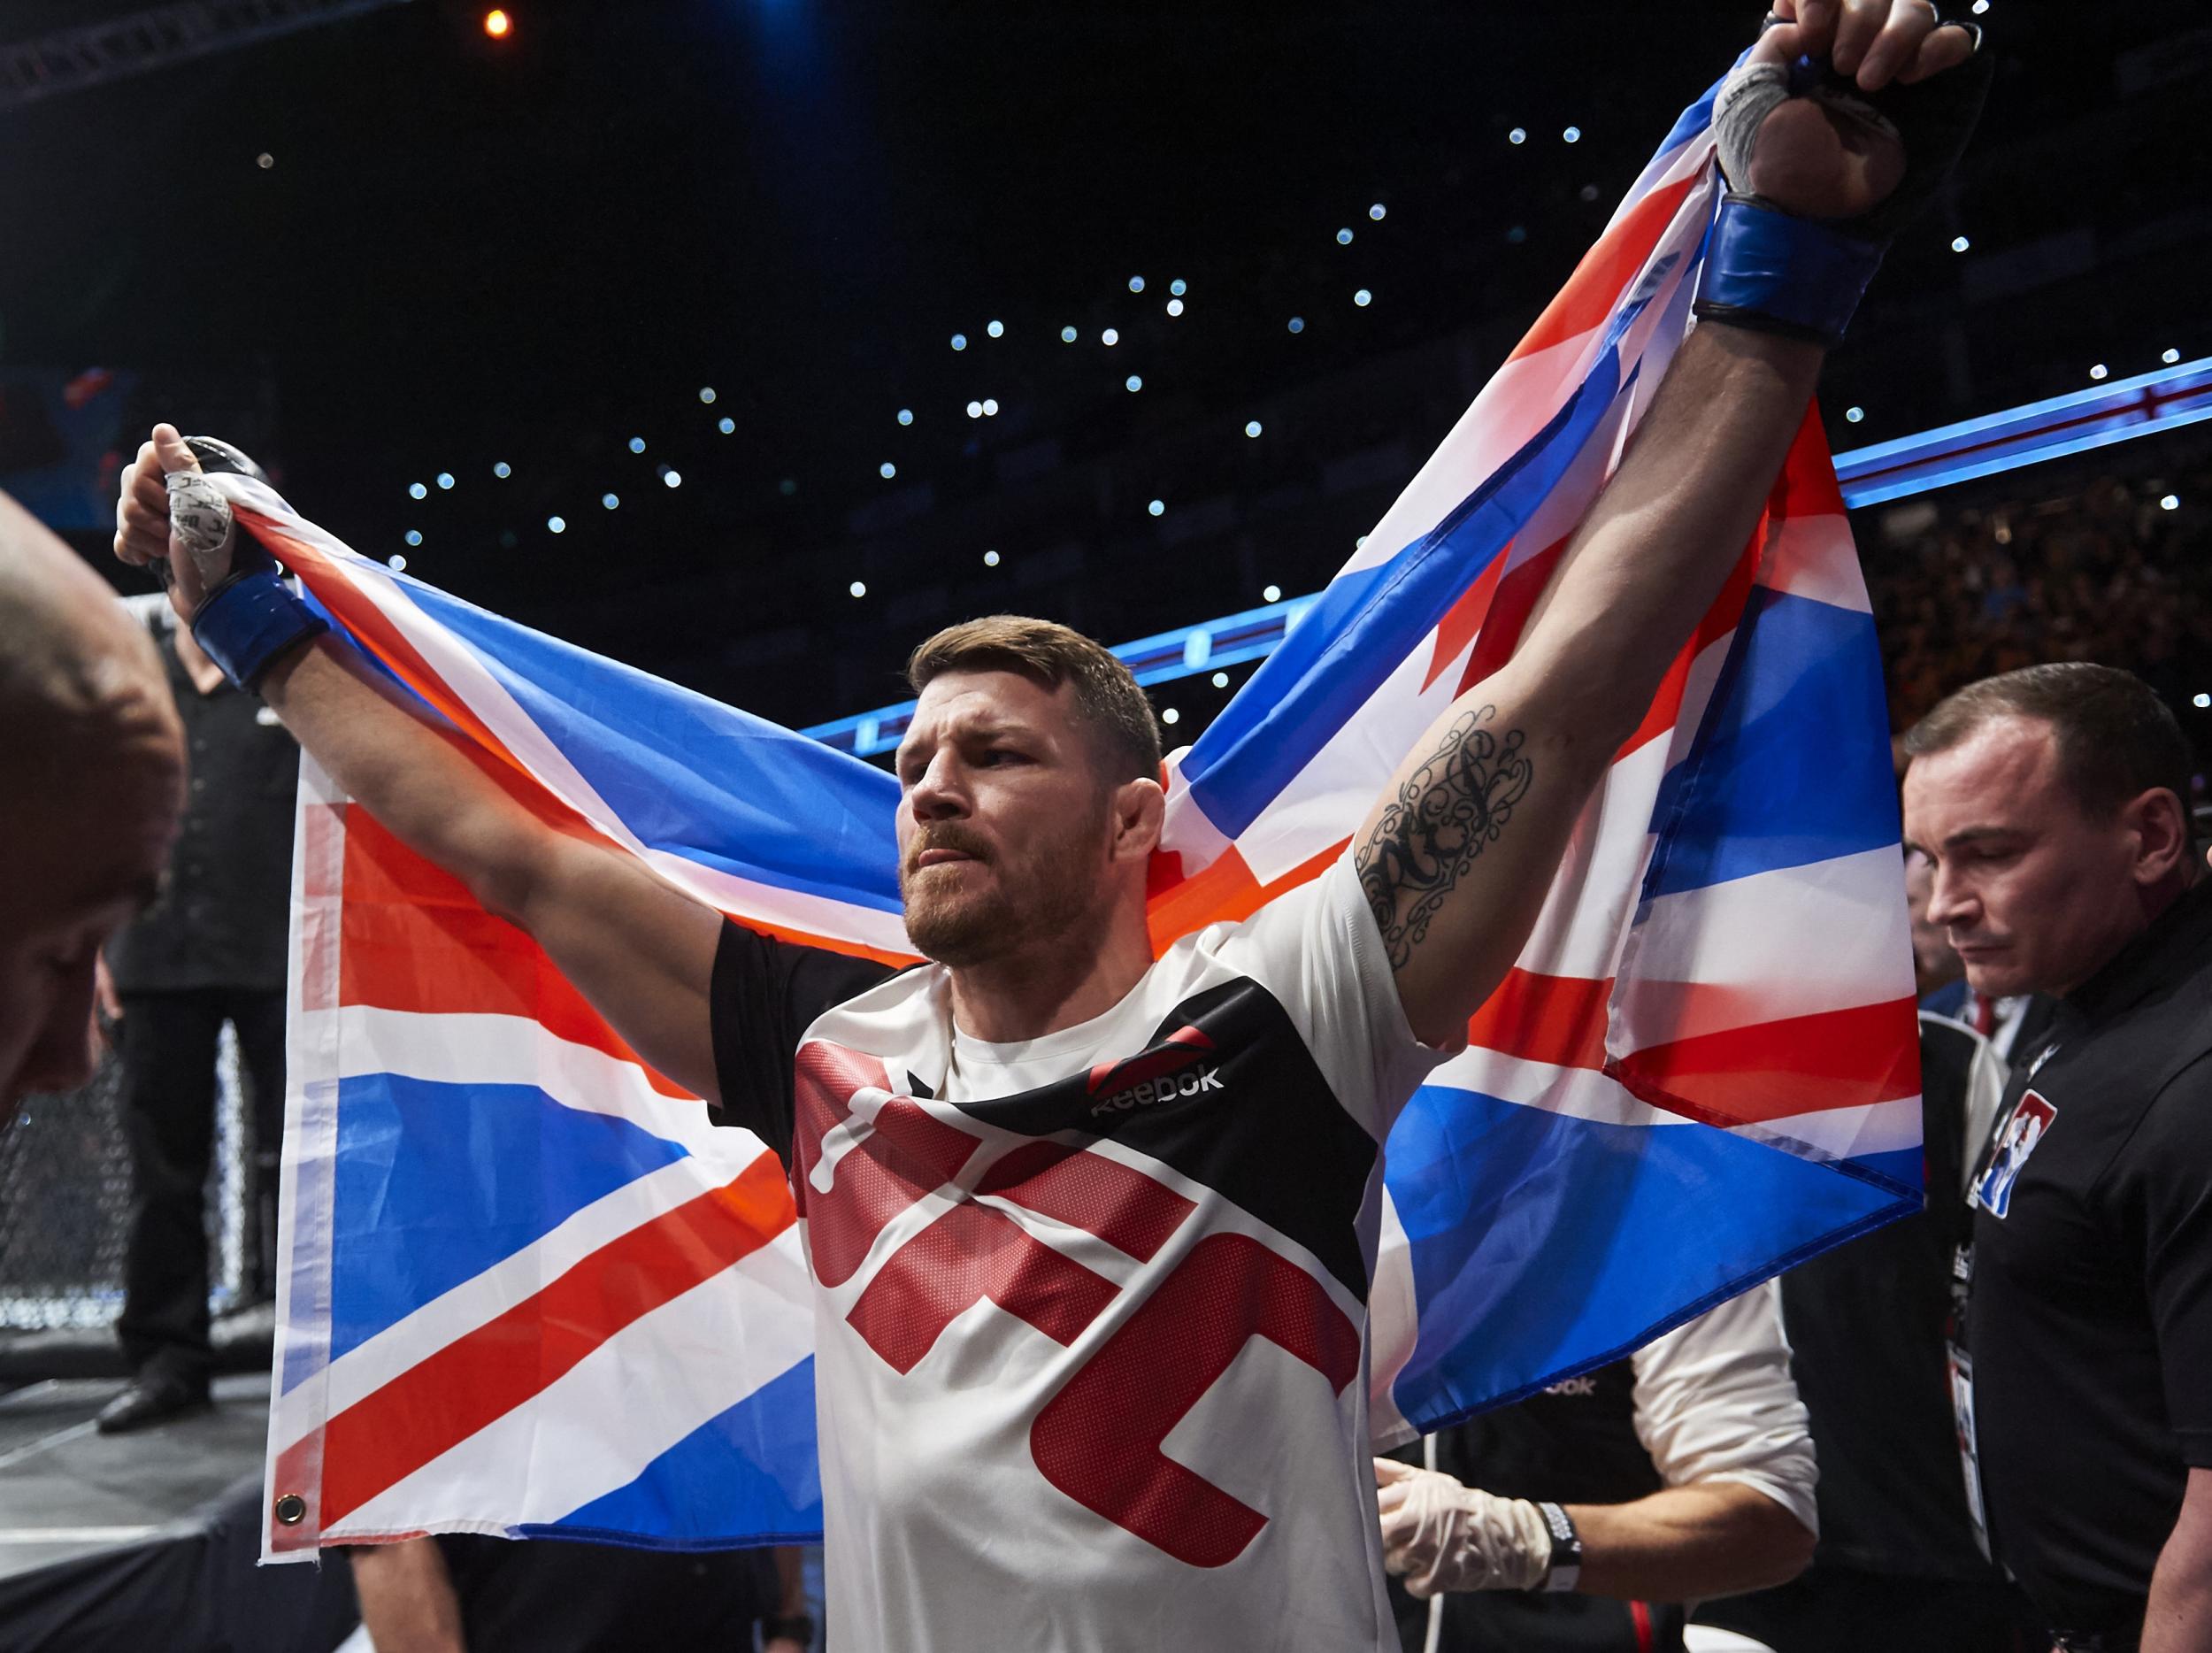 Michael Bisping, the UK's first UFC champion